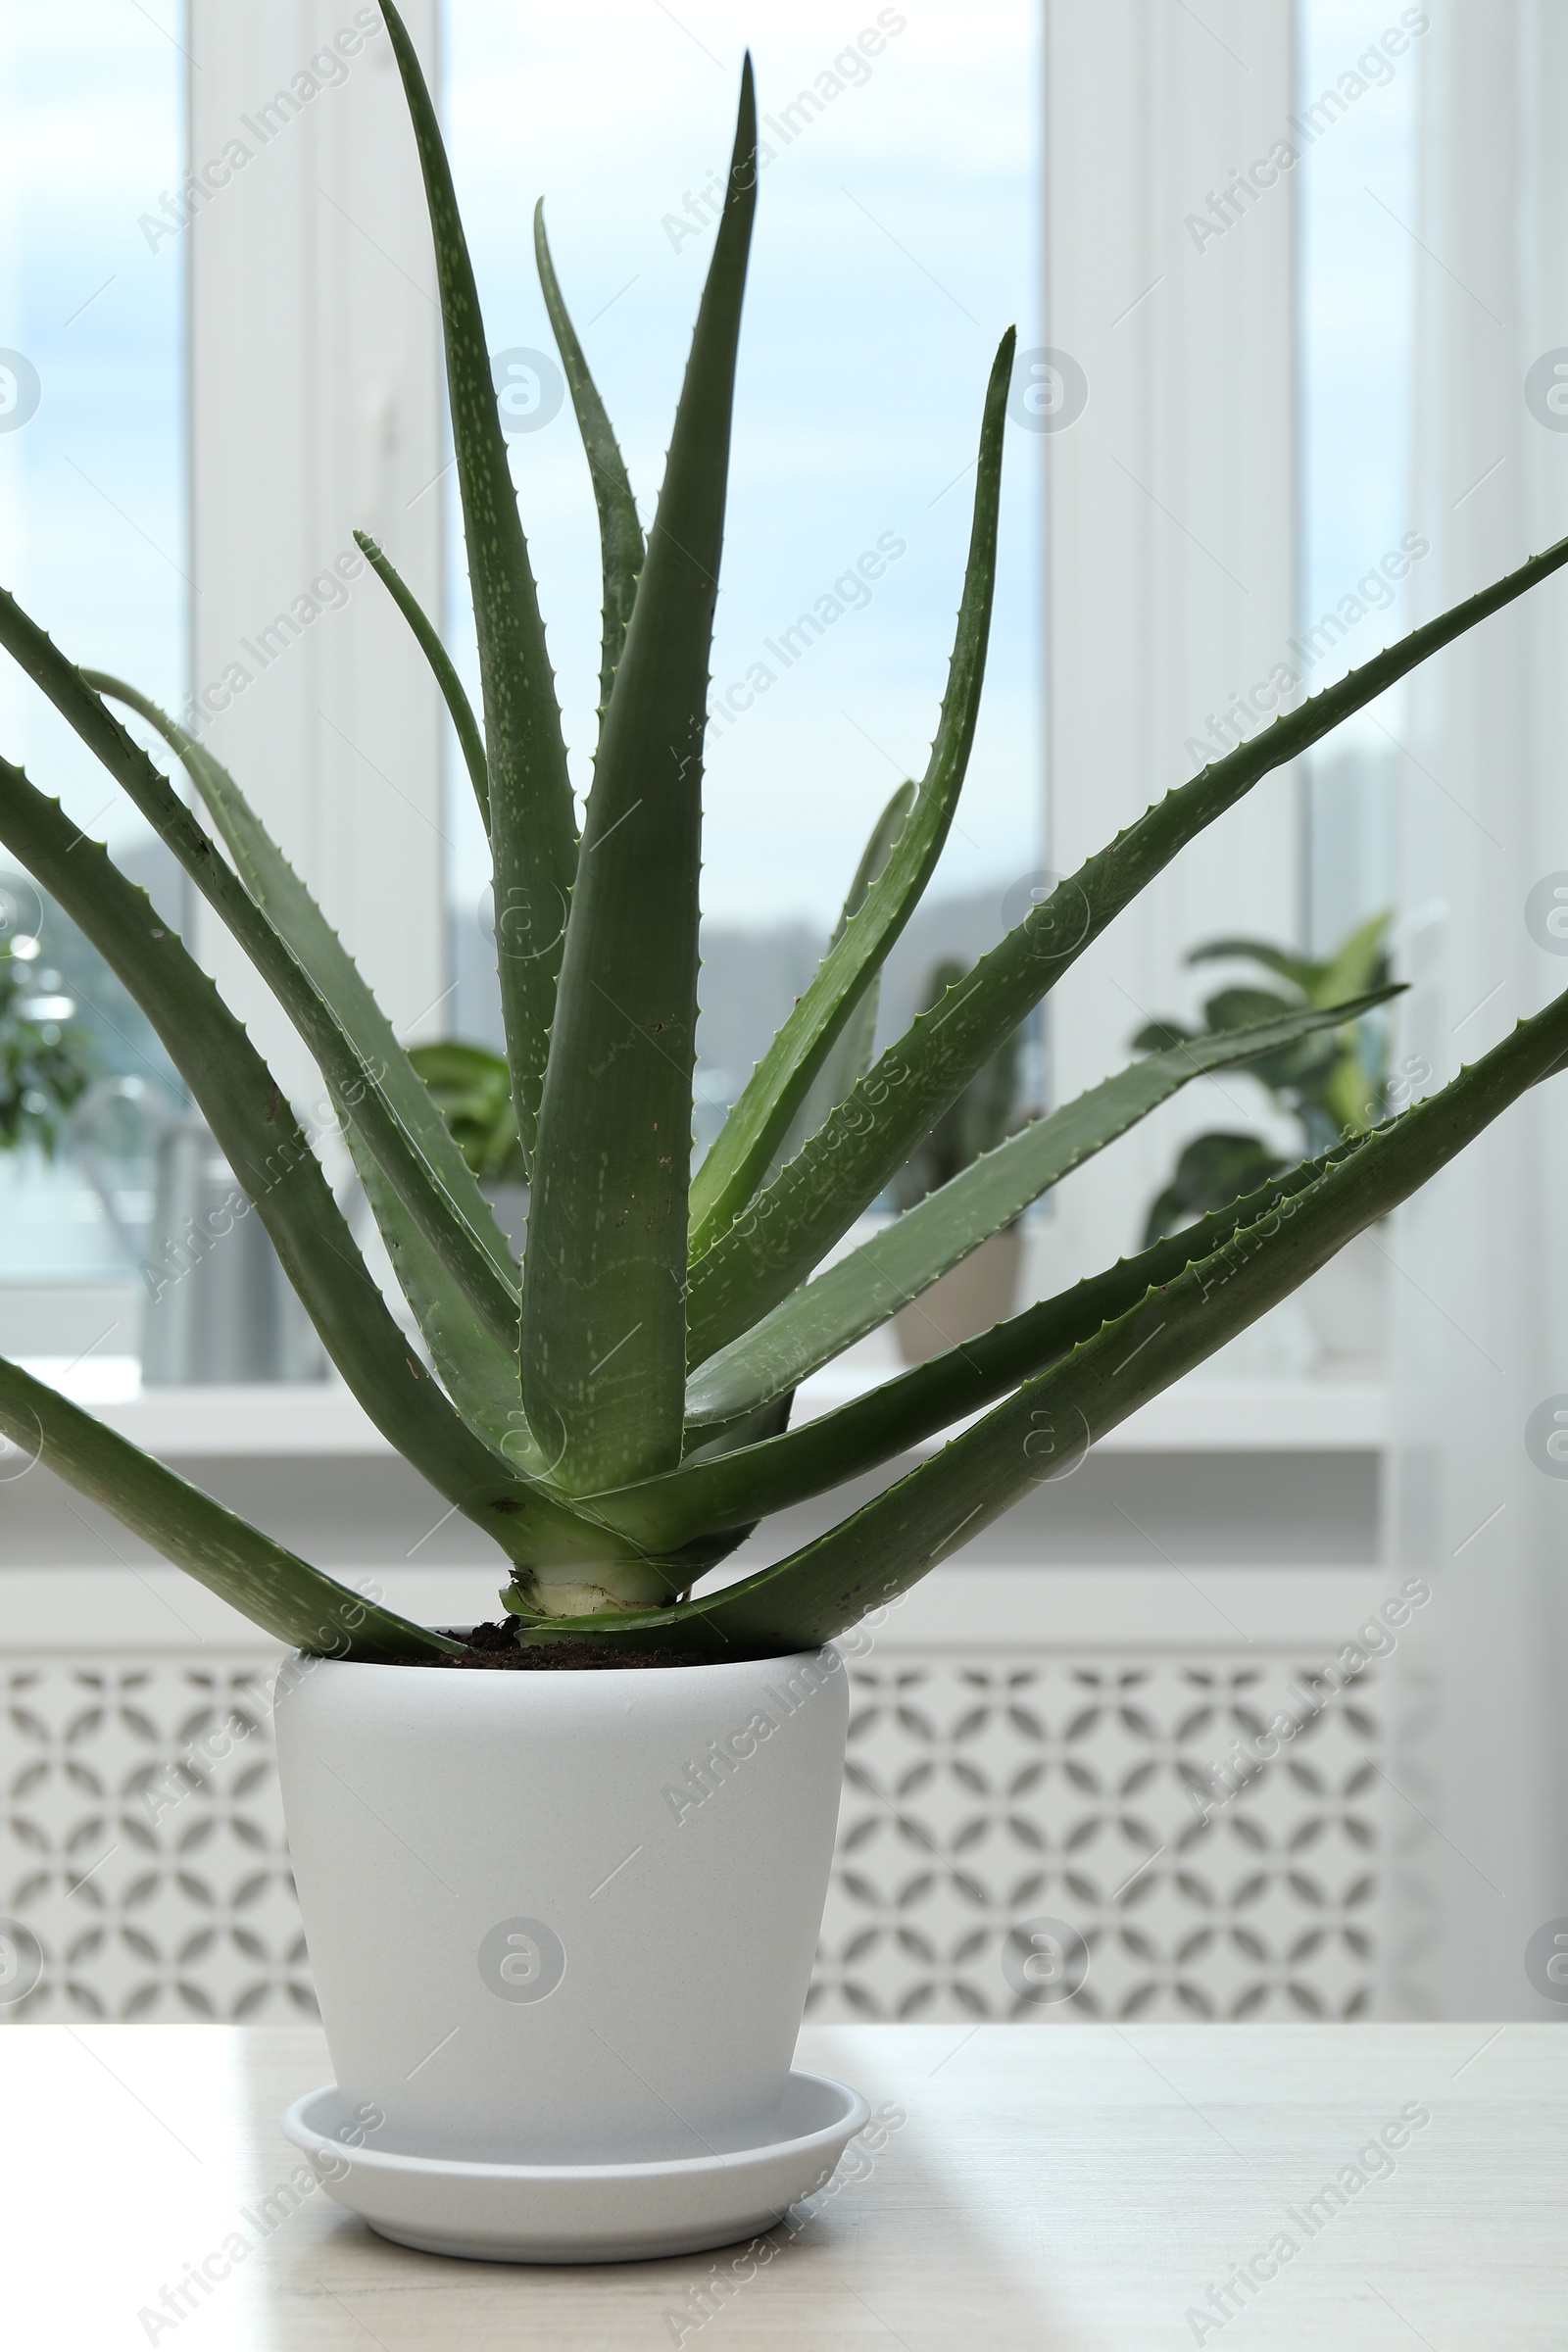 Photo of Green aloe vera plant in pot on table indoors